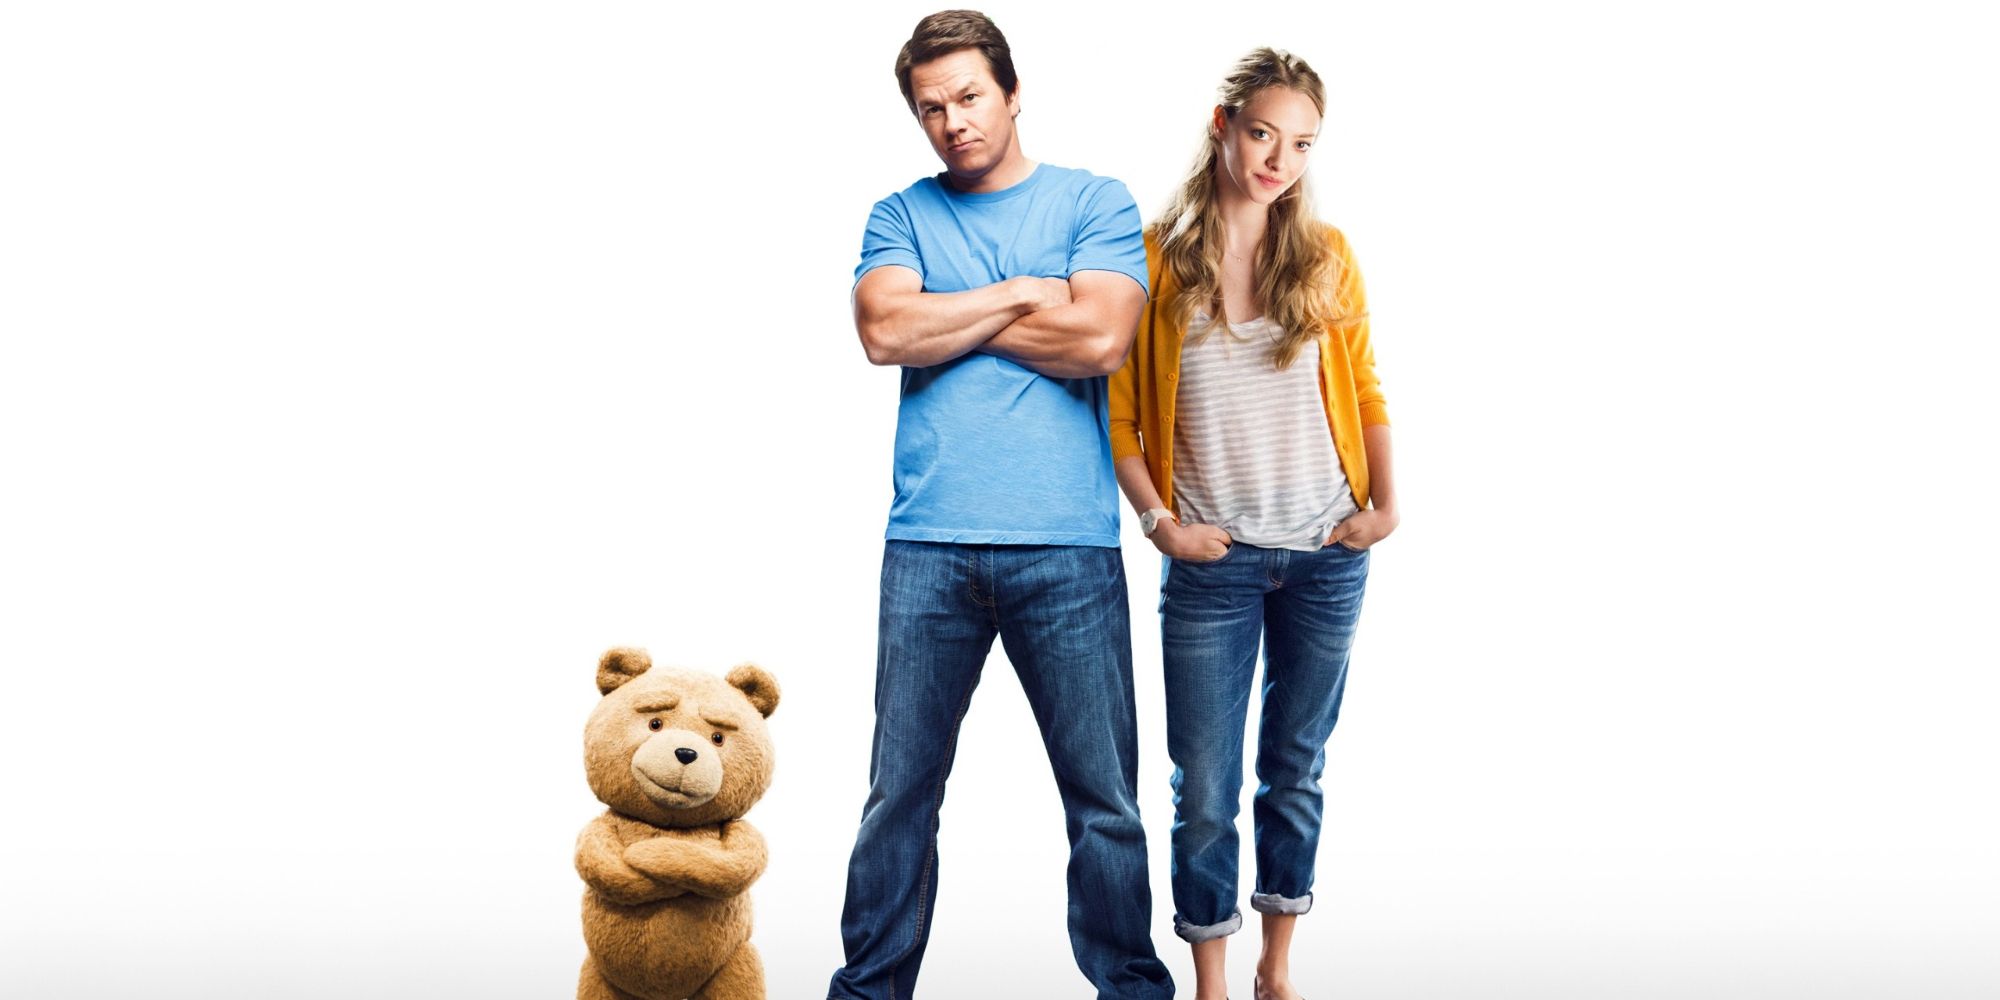 ted 2 poster cast